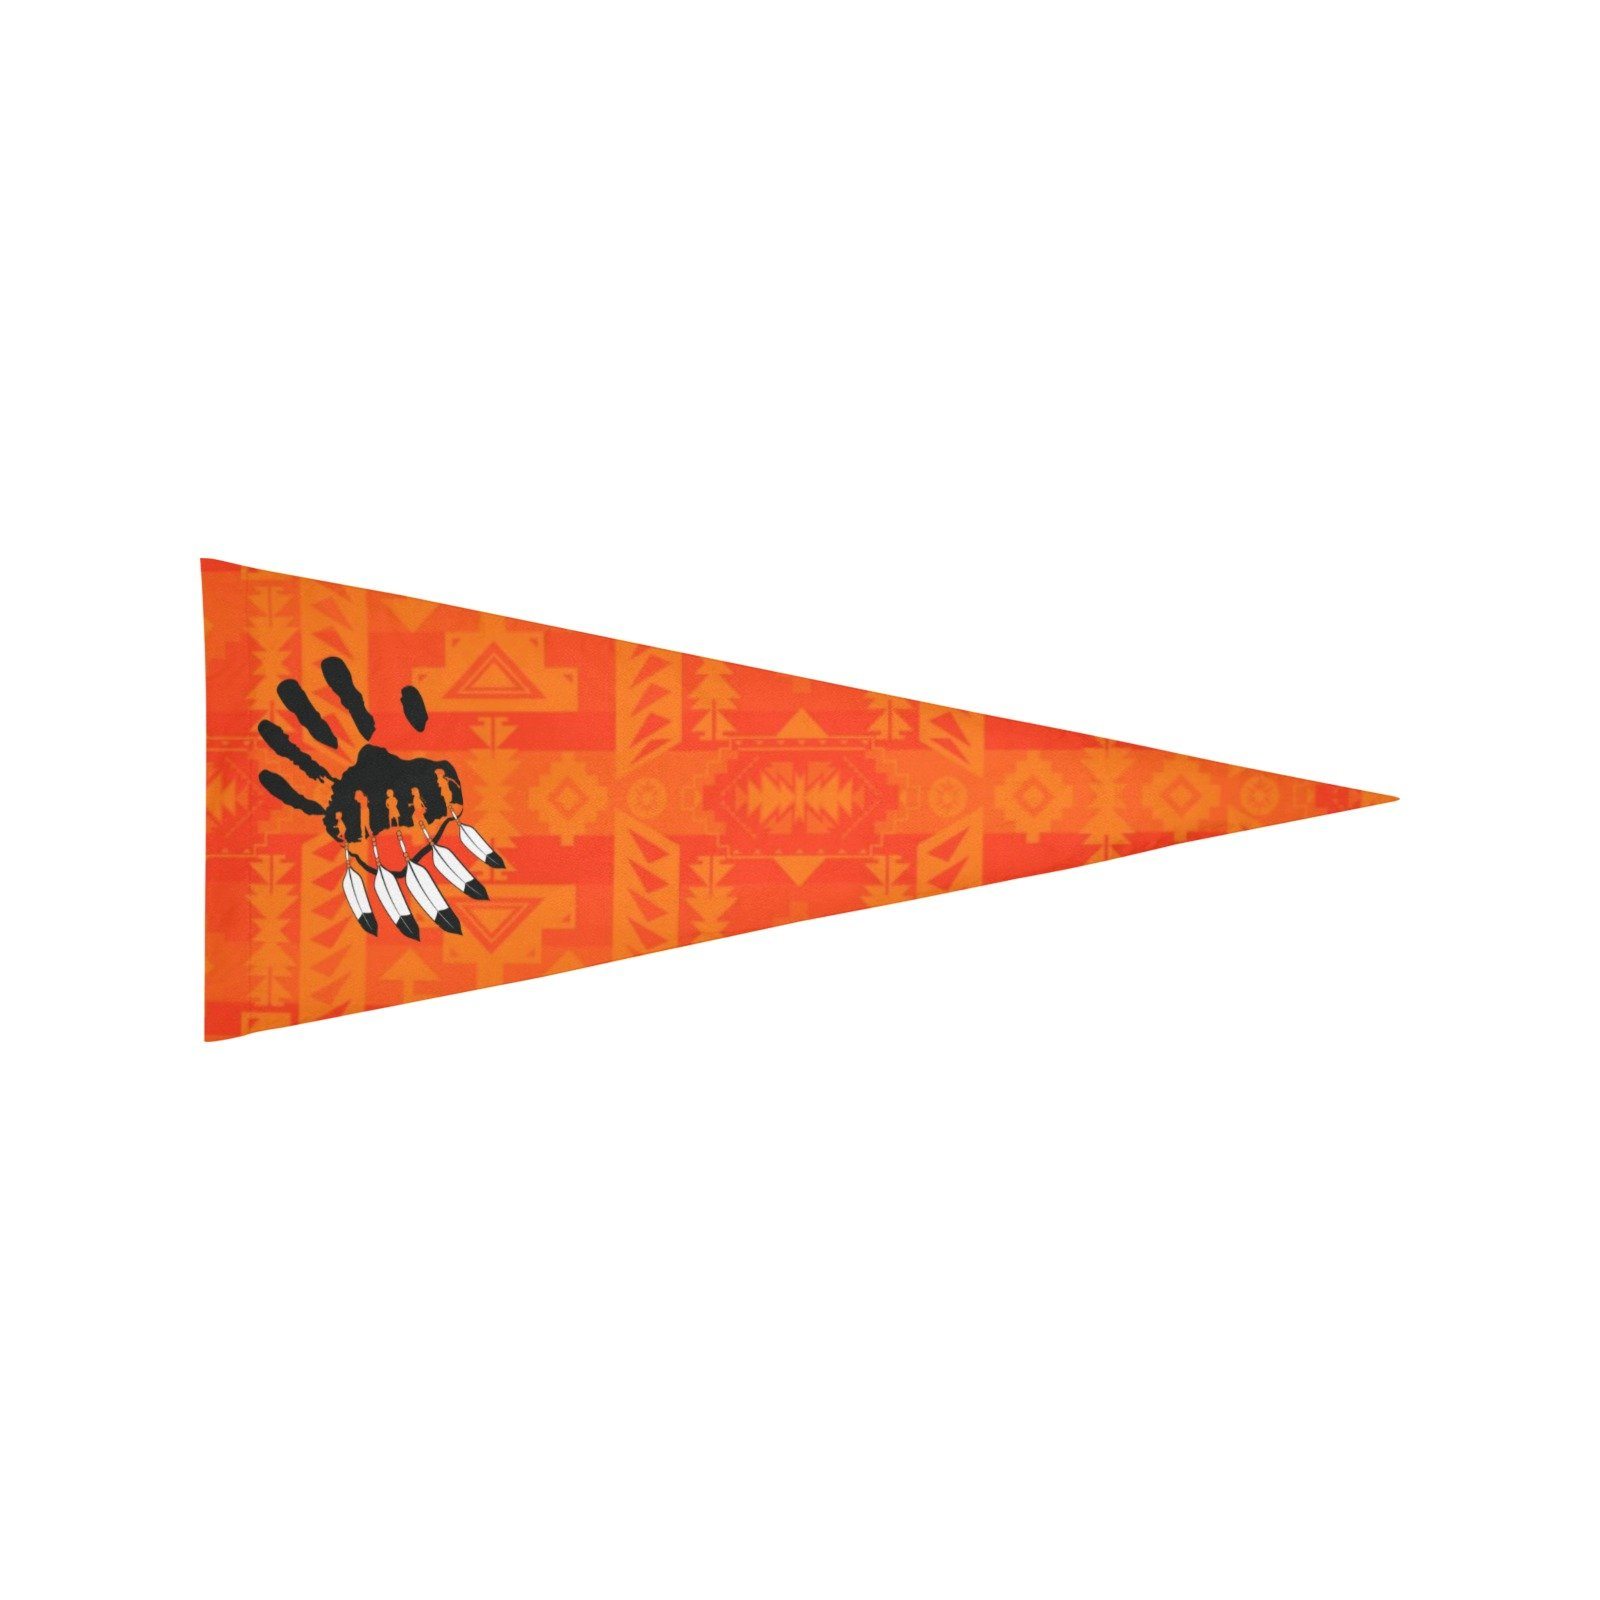 Chiefs Mountain Orange A feather for each Trigonal Garden Flag 30"x12" Trigonal Garden Flag 30"x12" e-joyer 